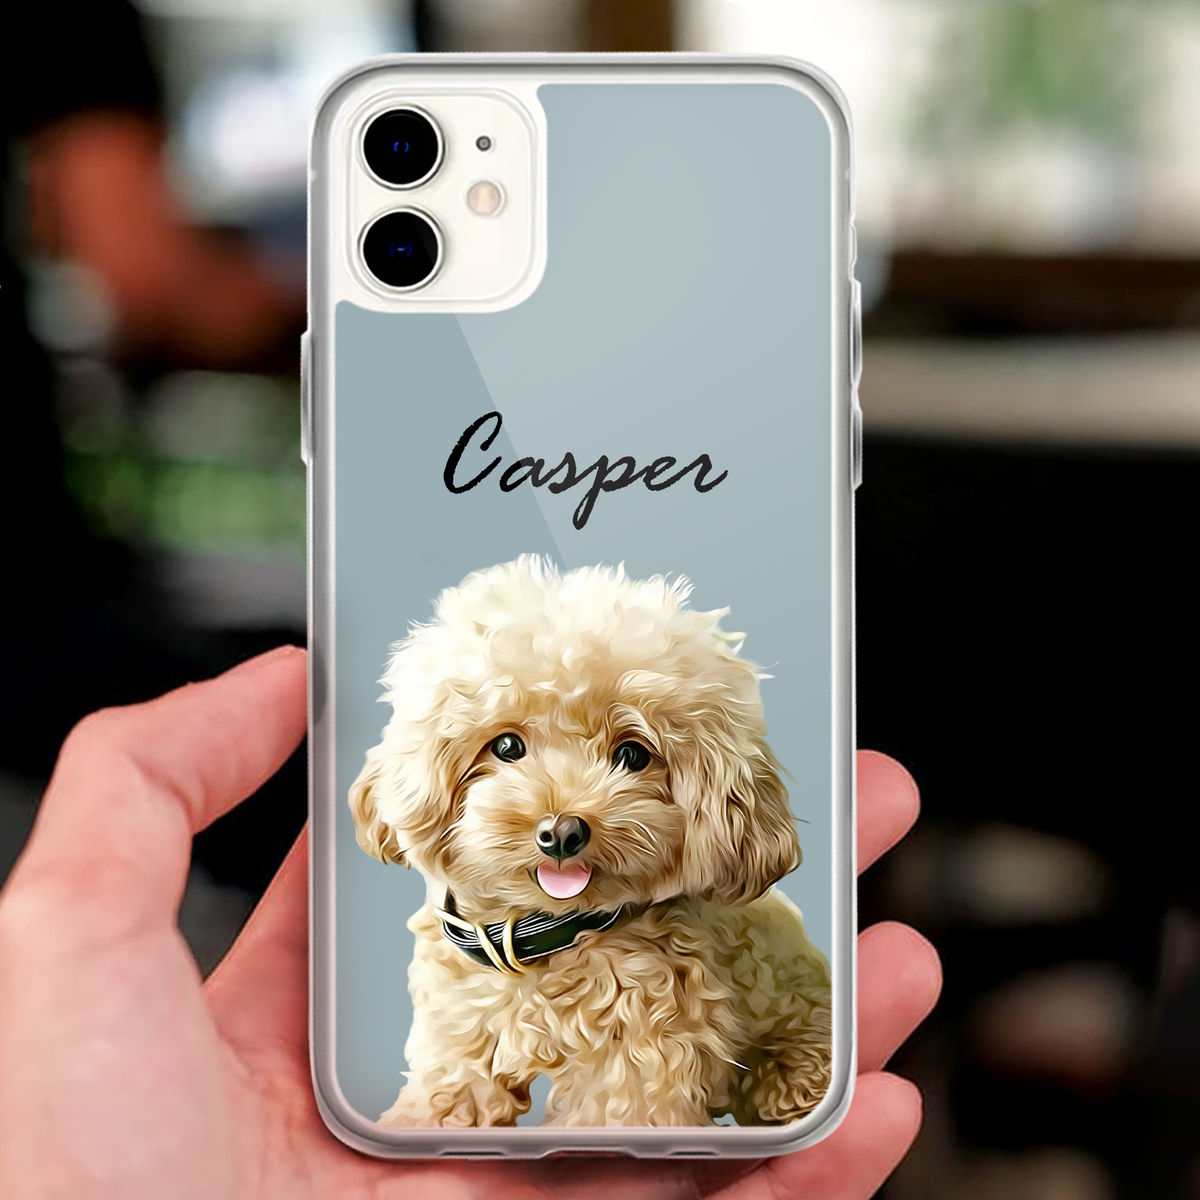 Custom Phone Case From Photo - iPhone Case - Pet Lover Gifts - Dog Portrait - Digital Oil Painting - Christmas Gifts, Custom Photo Gifts_2